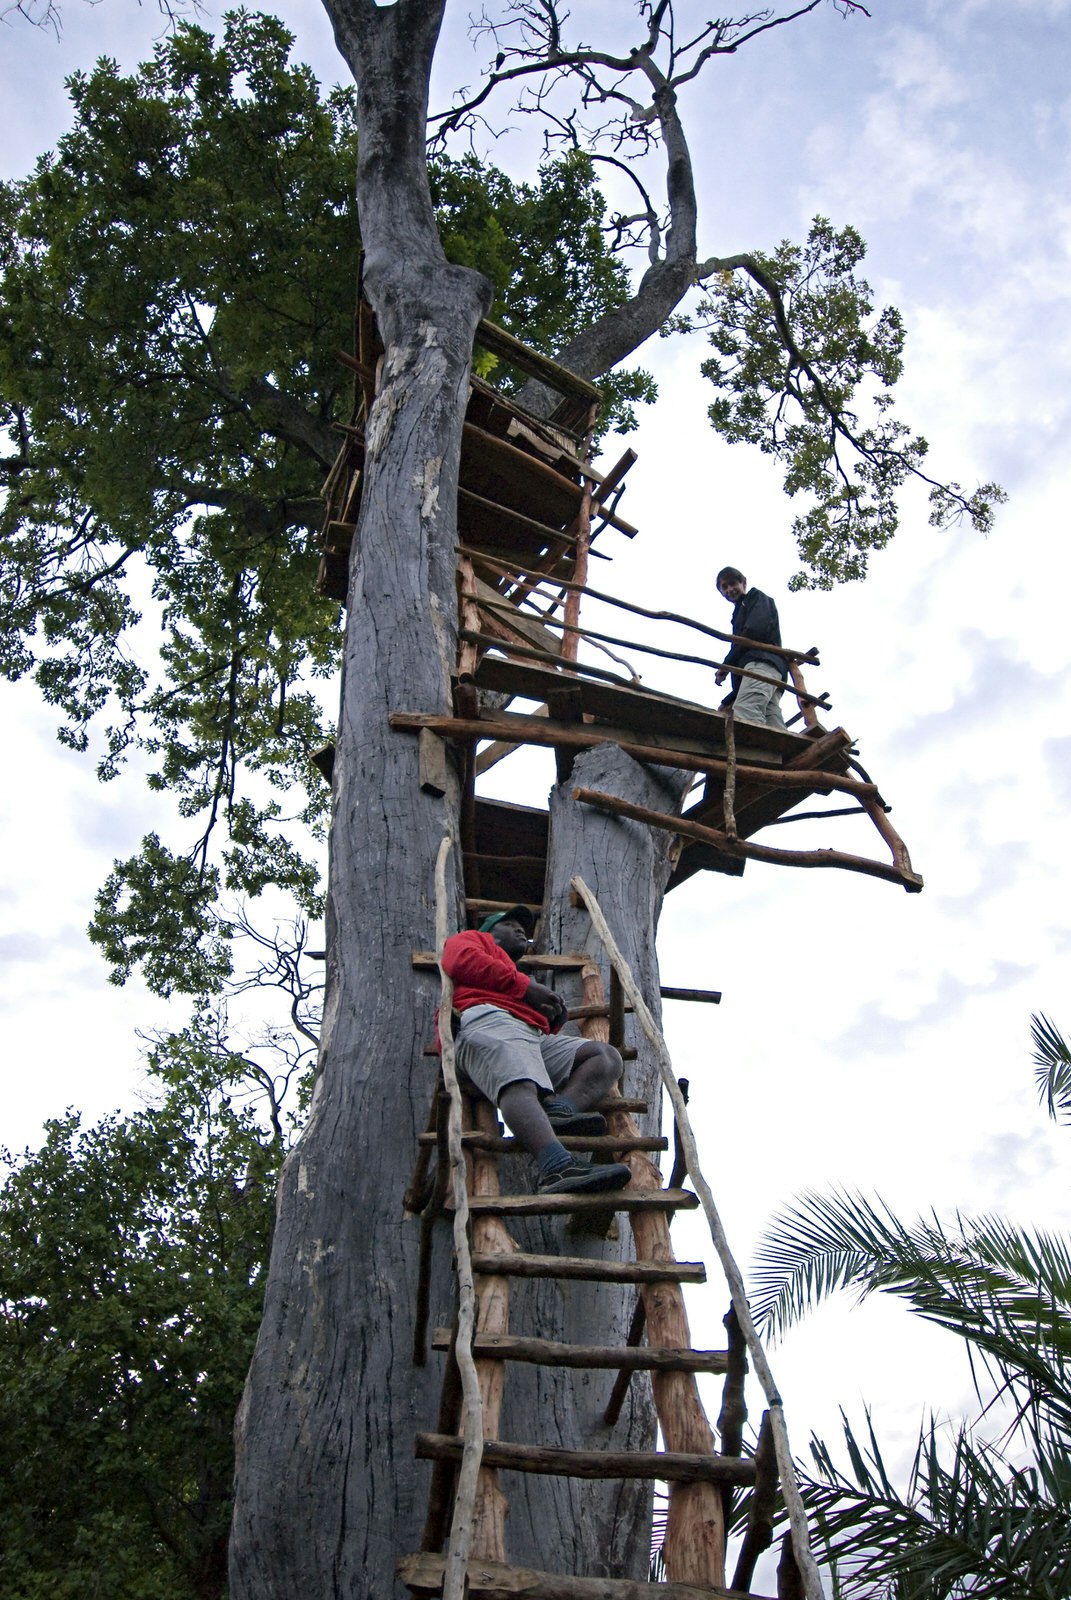 Makeshift ladders work their way up a large tree to a wooden platform high up in the tree canopy.